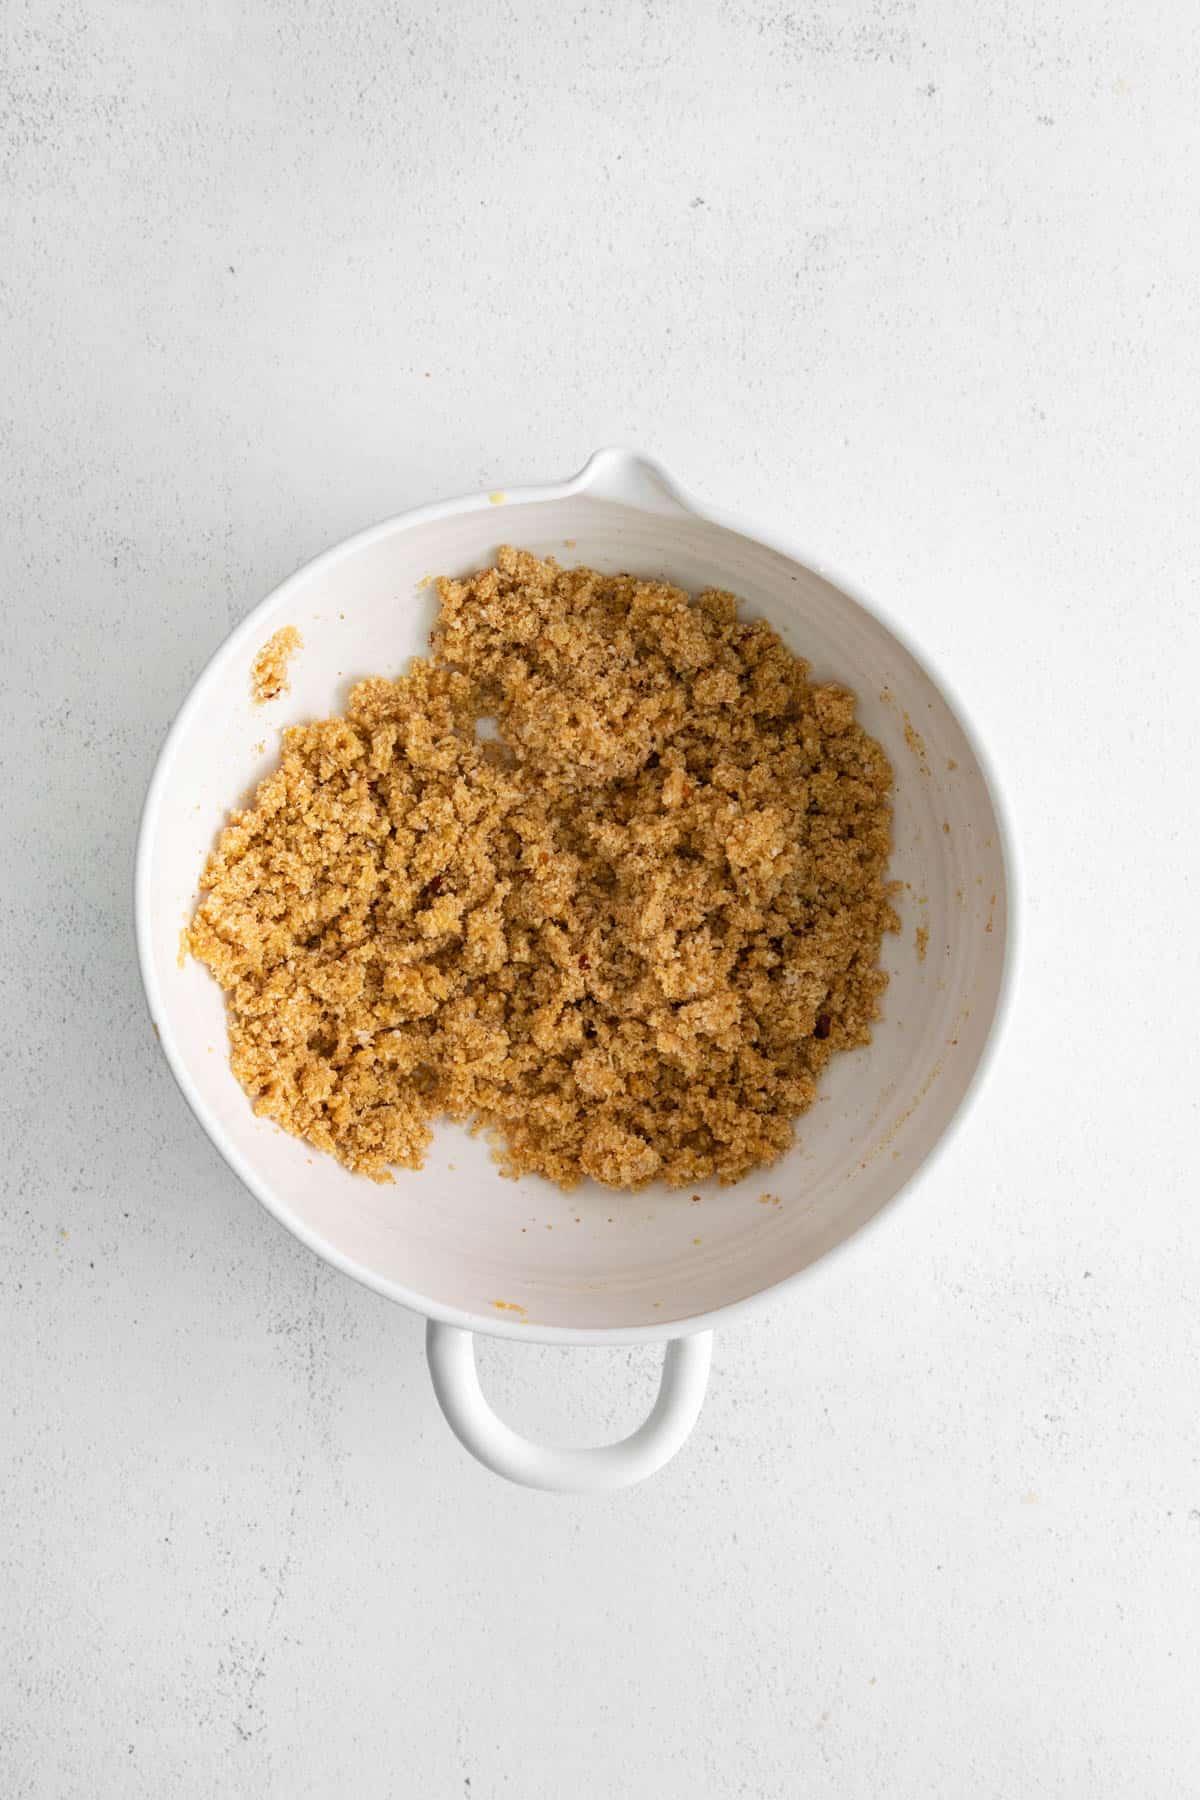 Seasoned breadcrumb mixture in a white mixing bowl.